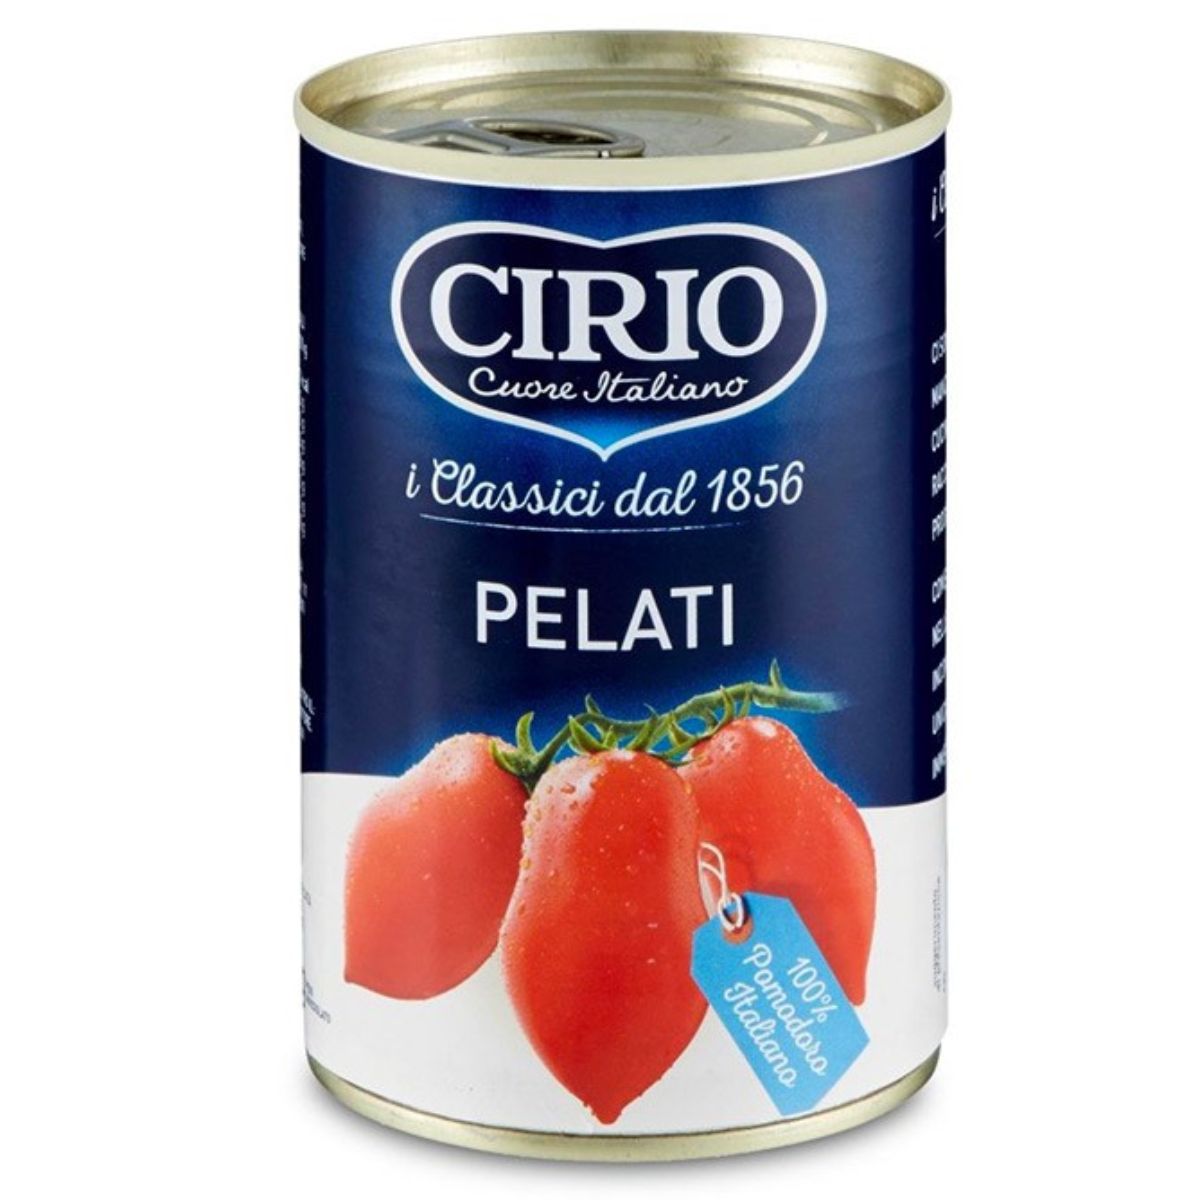 A can of Cirio - Peeled Tomatoes - 400g on a white background.